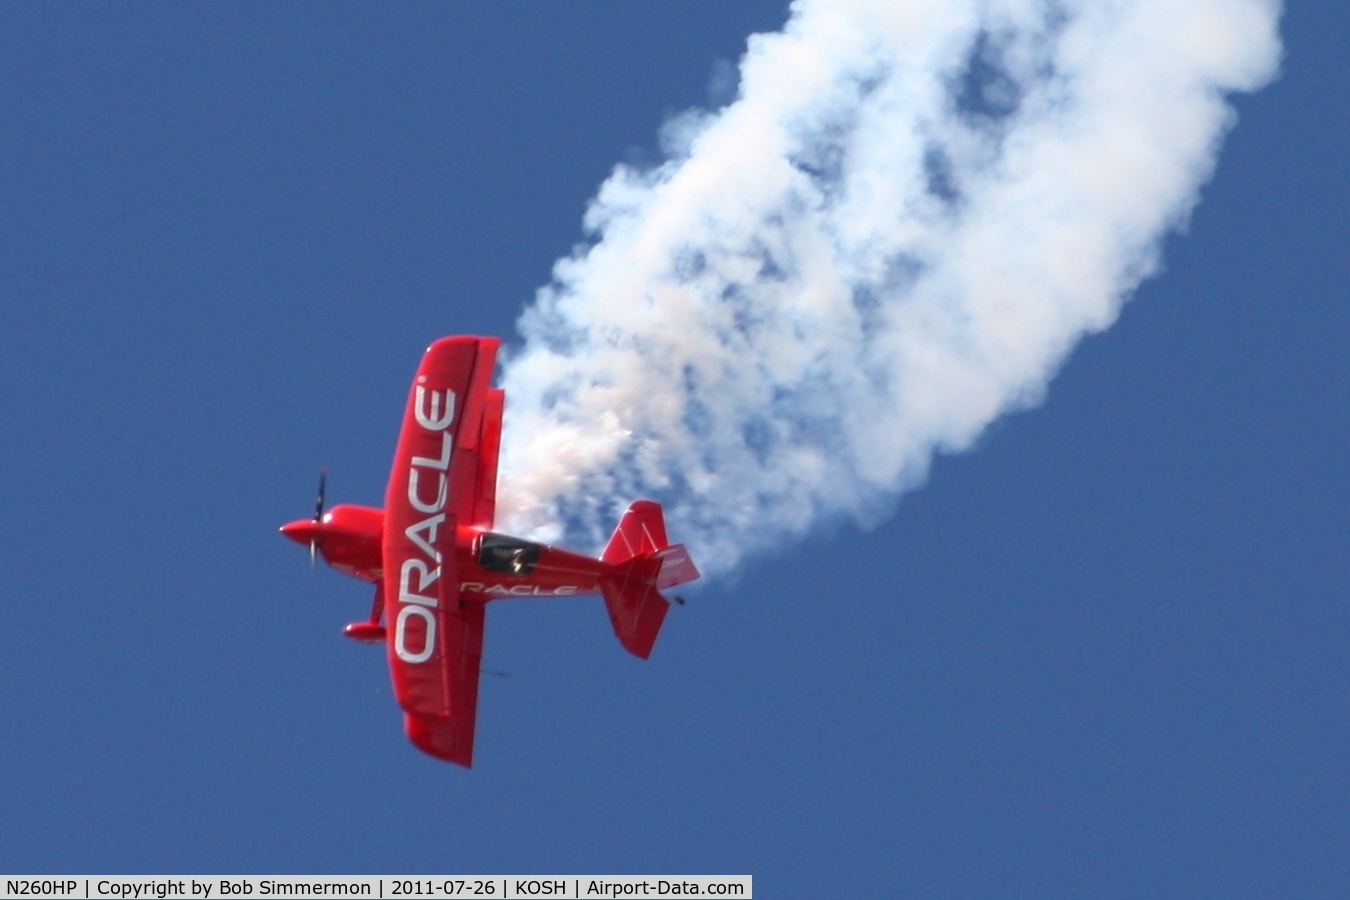 N260HP, 2010 Aviat Pitts S-1S C/N 0001, Performing at Airventure 2011.